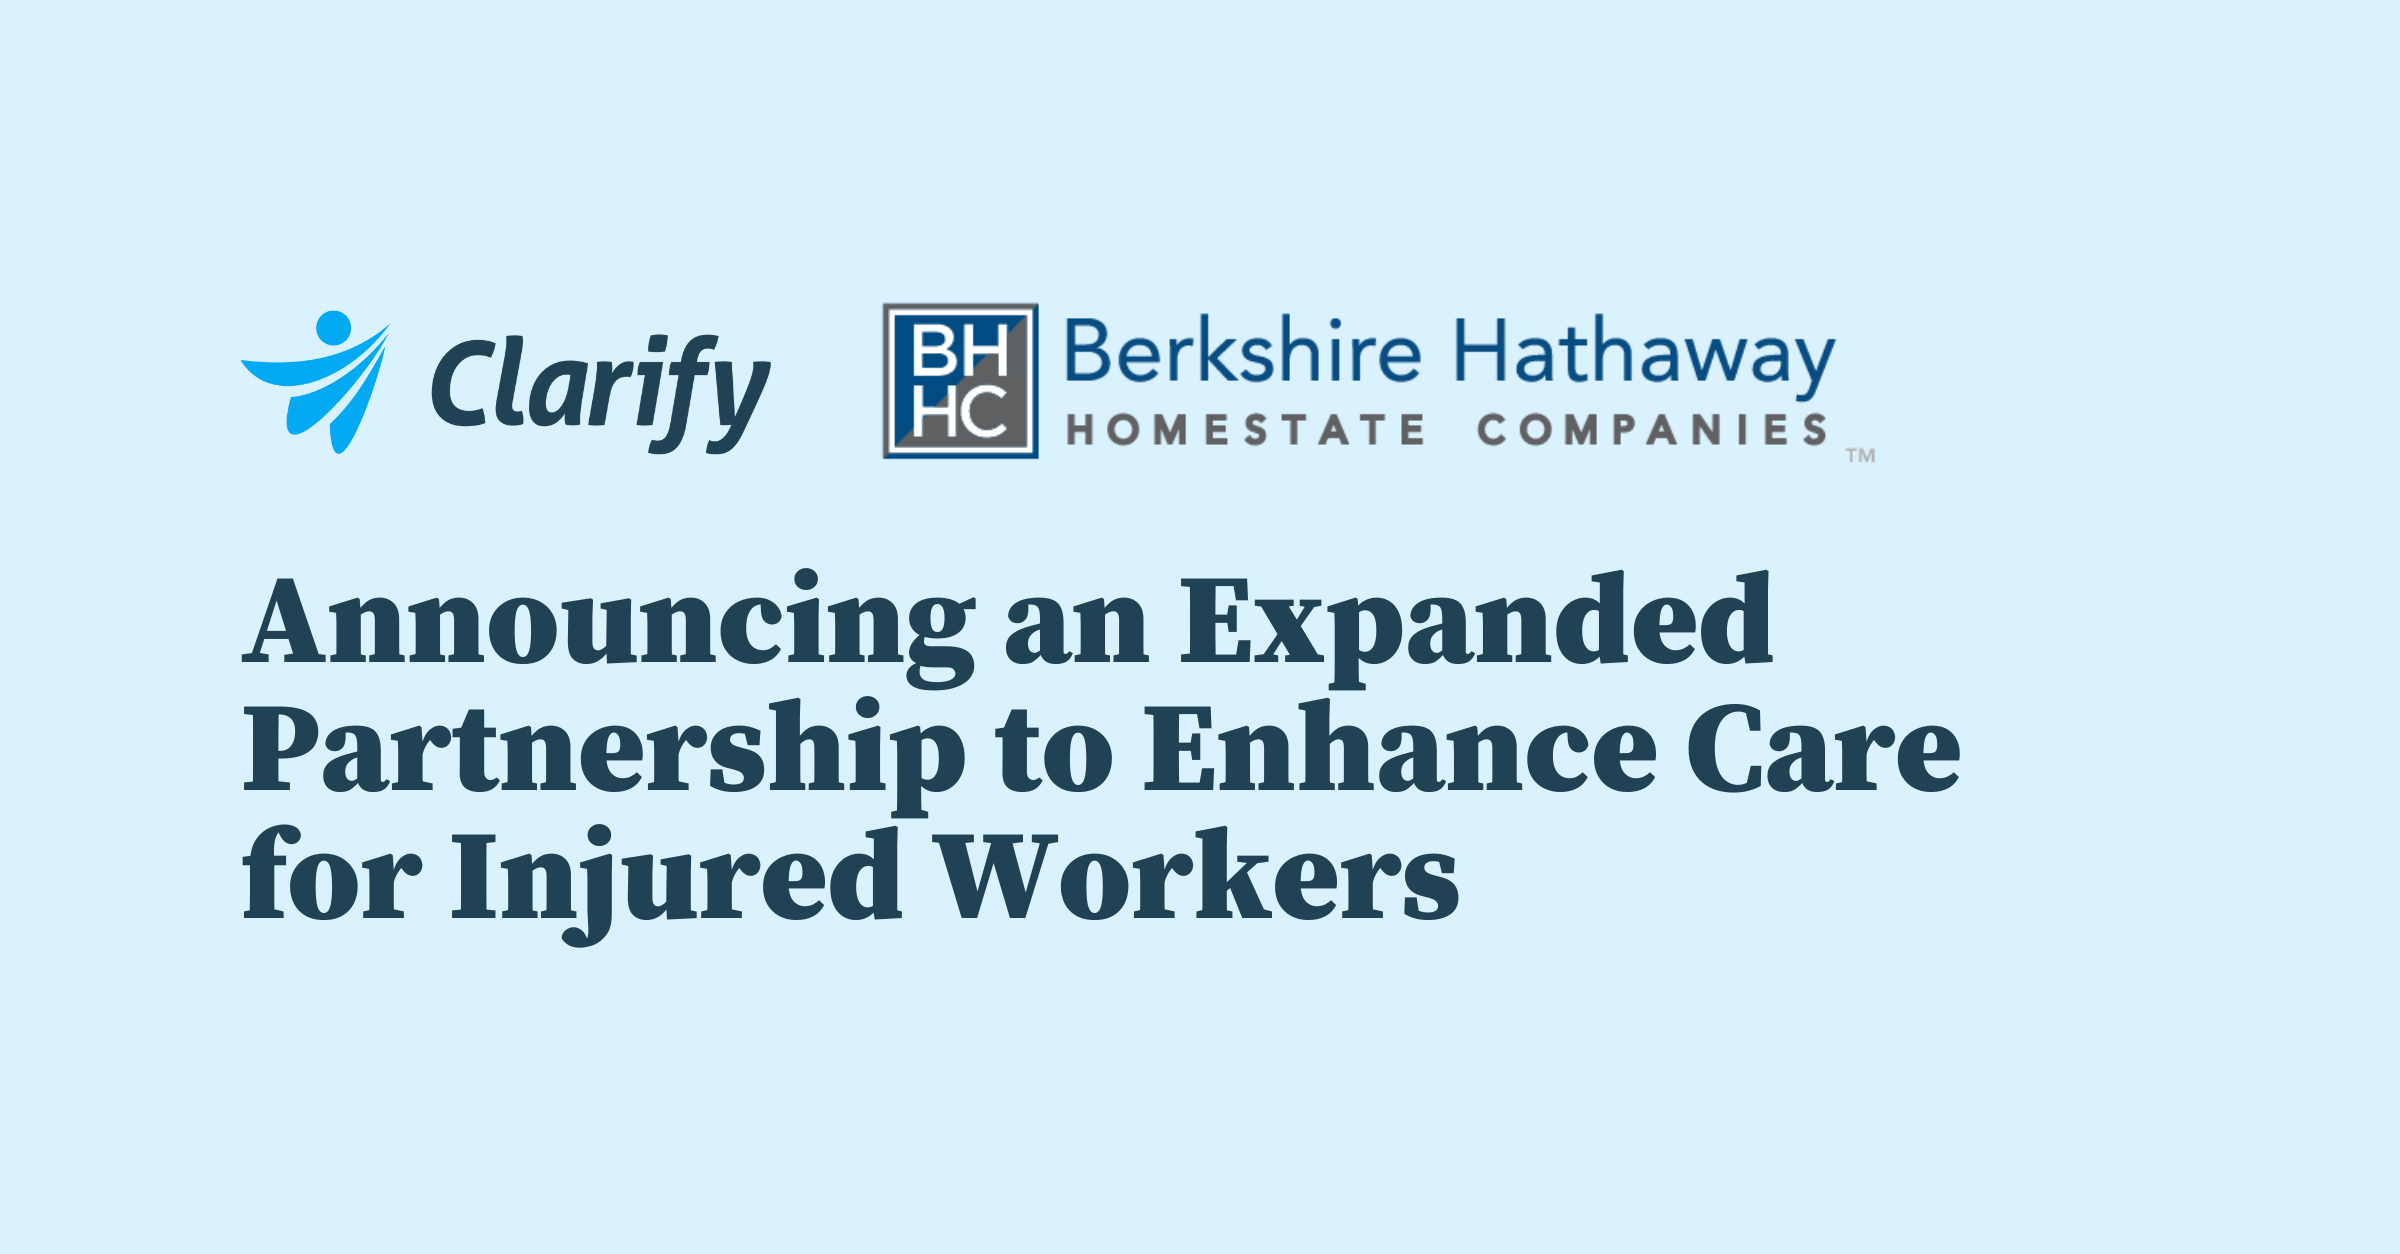 Thumbnail for Berkshire Hathaway Homestate Companies (BHHC), Workers Compensation Division Partners with Clarify Health to Enhance Care for Injured Workers through Data-Driven Approach